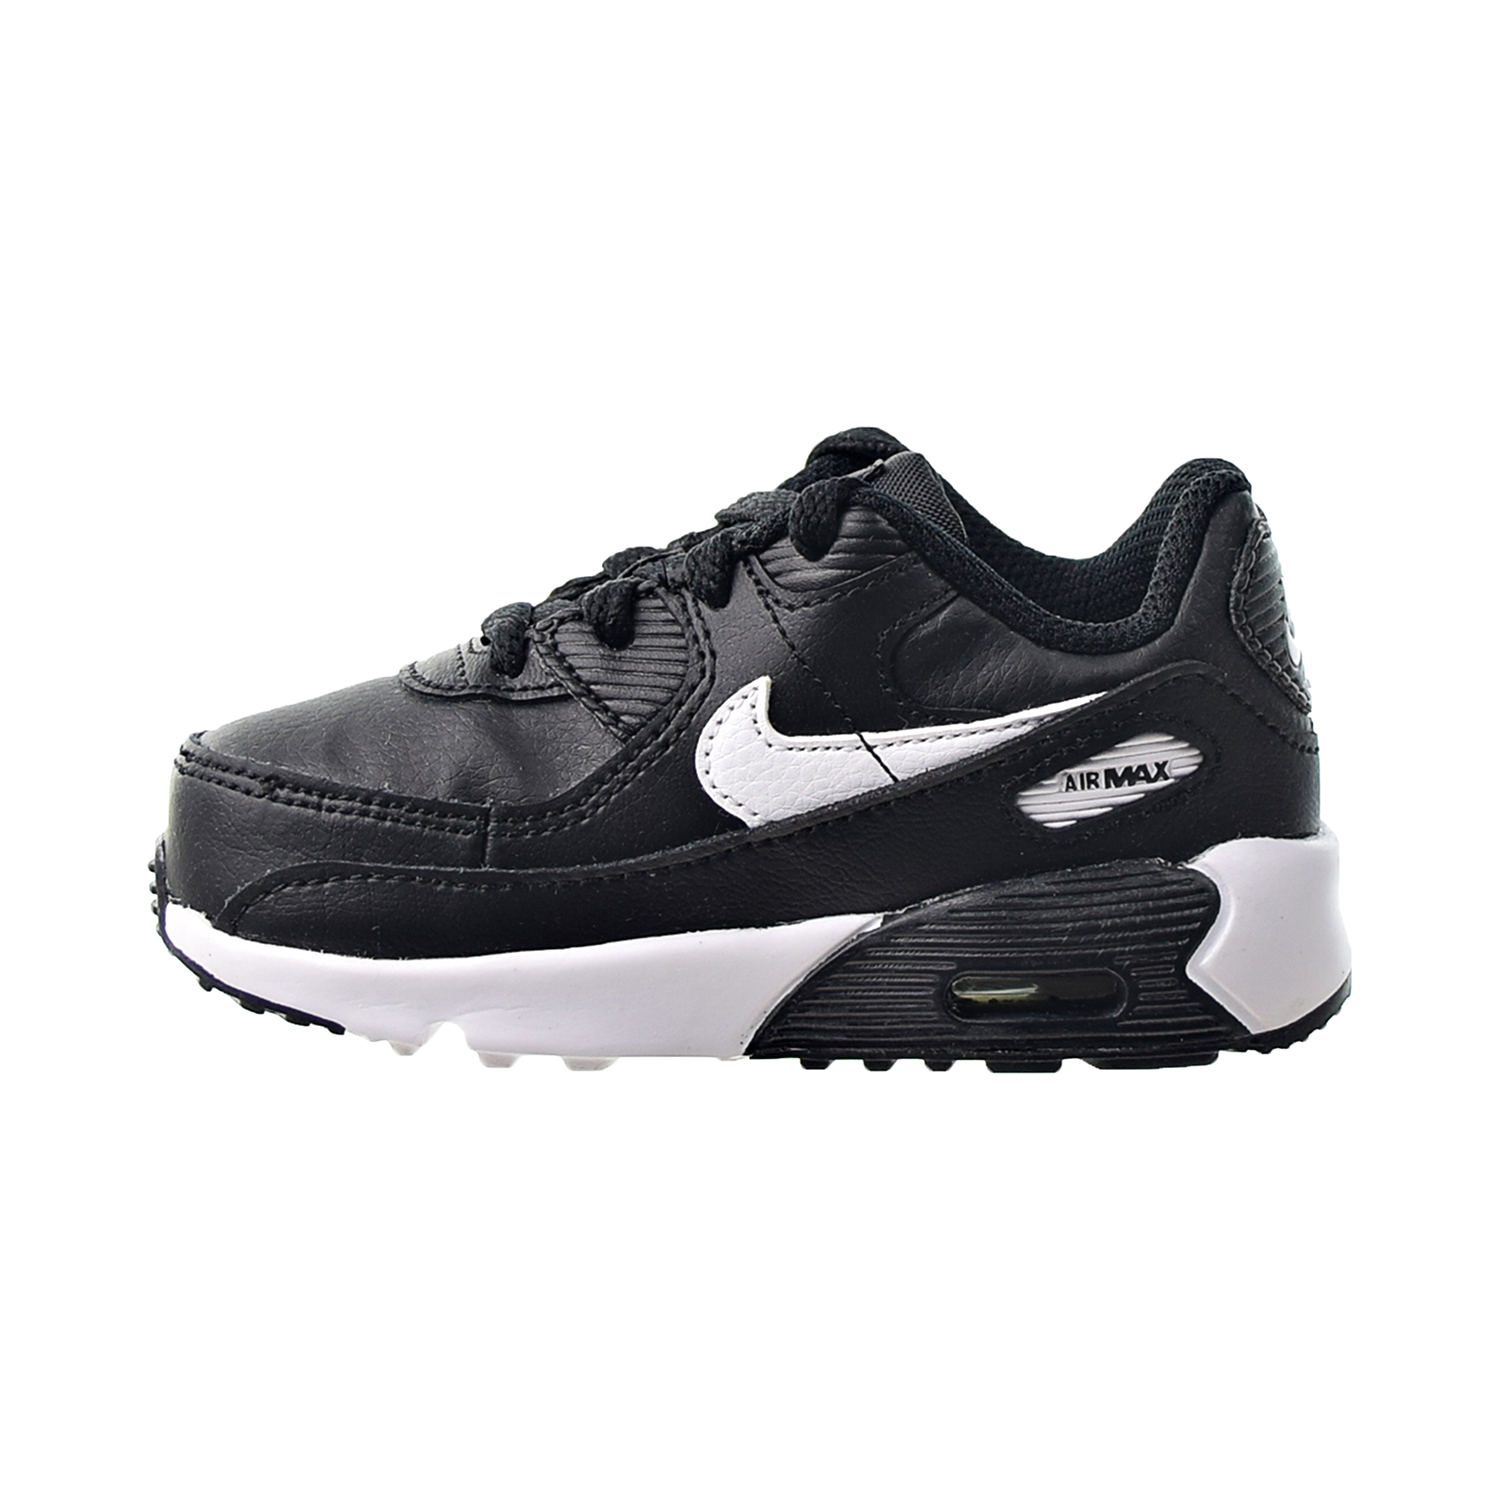 Nike Air Max 90 LTR Toddlers' Shoes Black-Black-White cd6868-010 - image 4 of 6